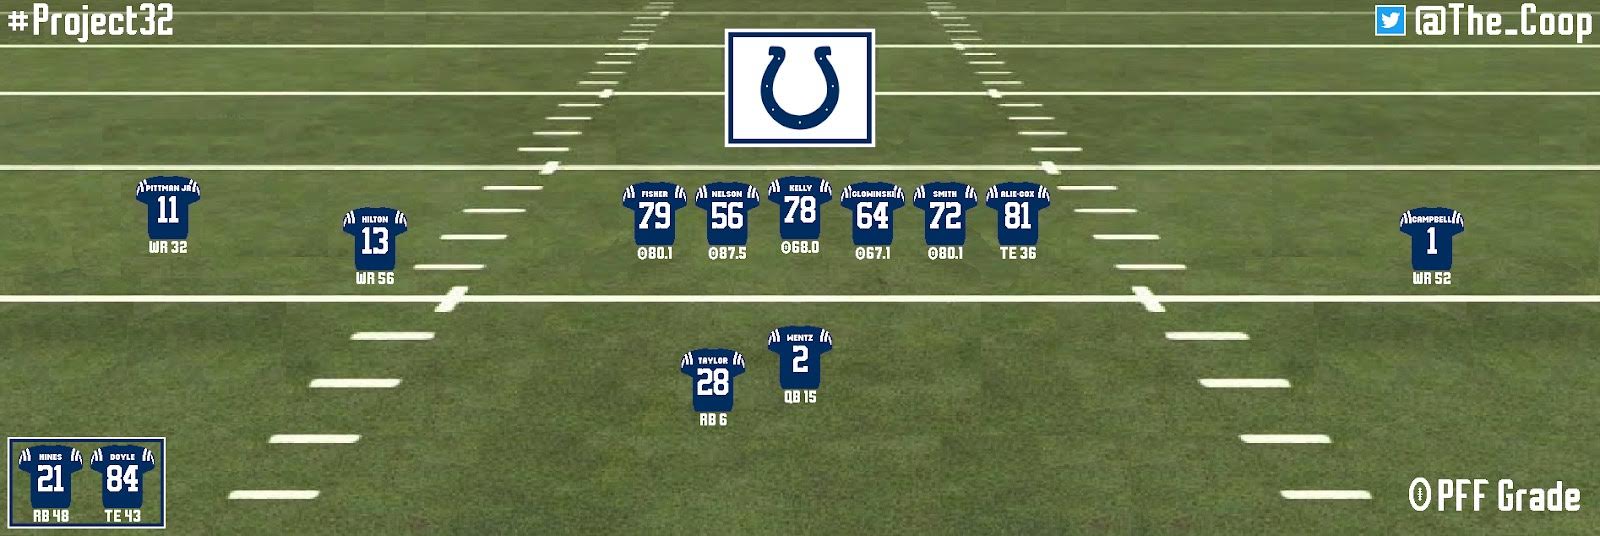 Indianapolis Colts 2021 projections